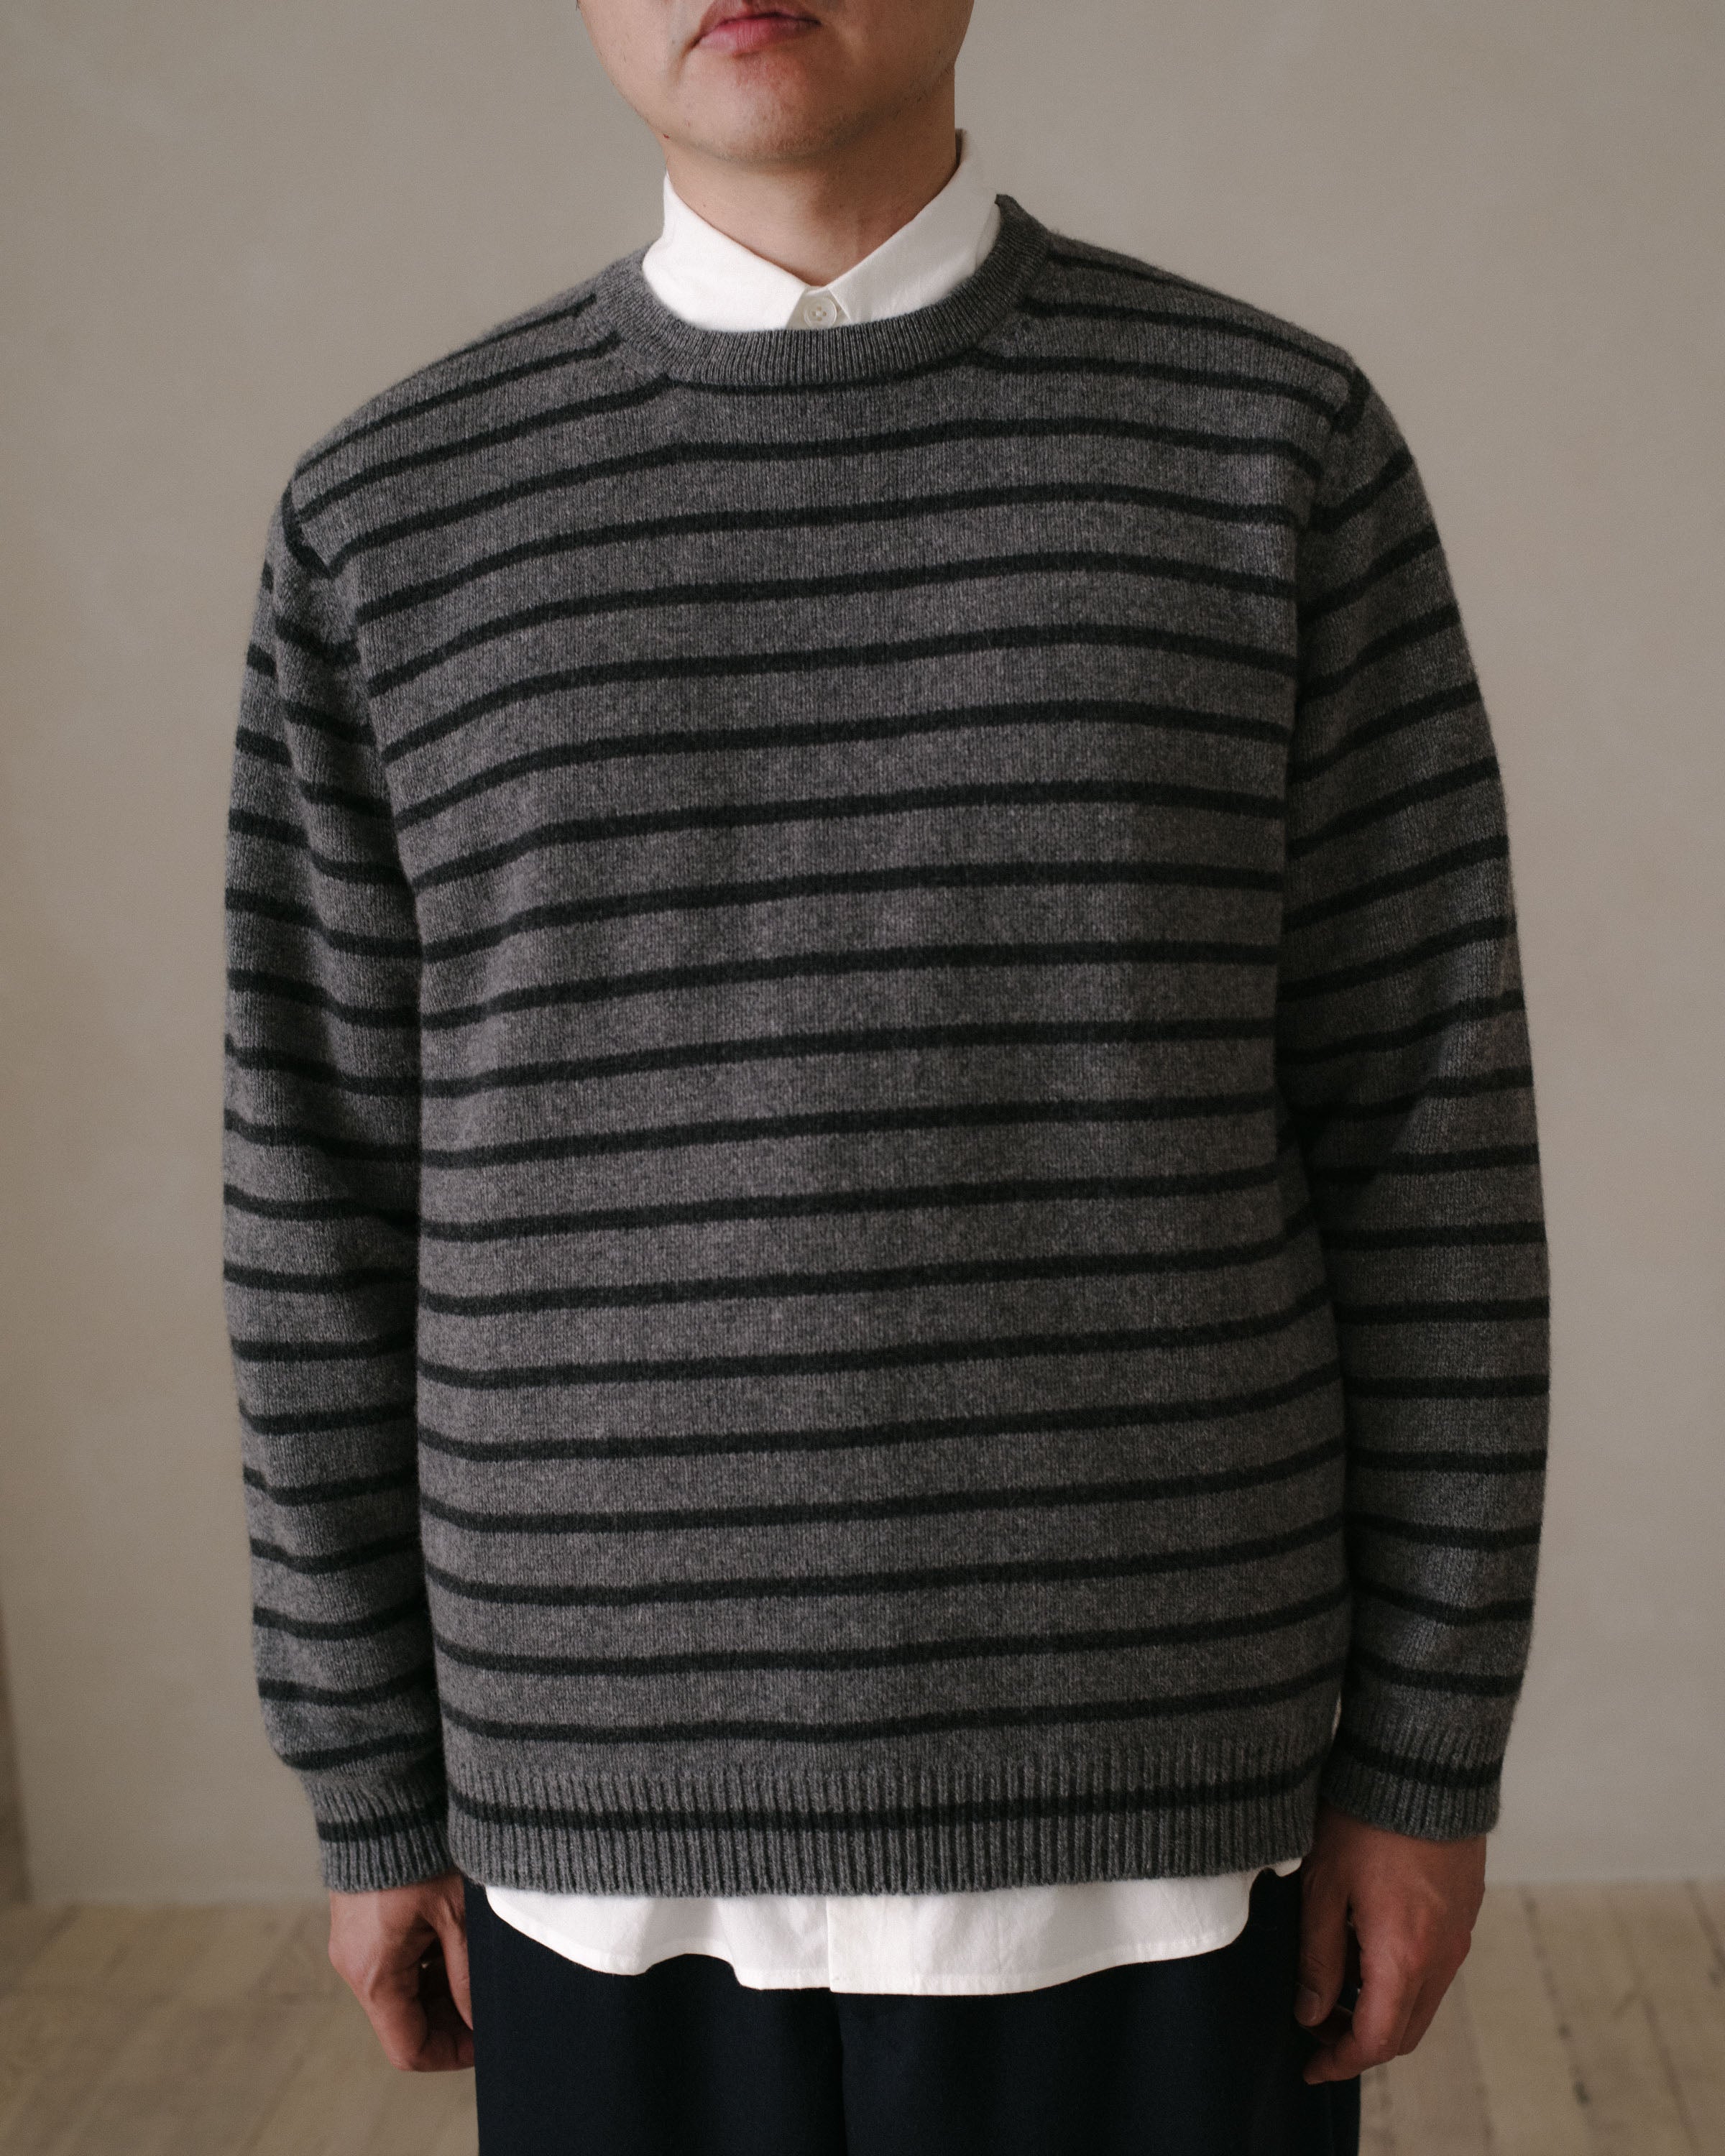 Striped Sweater - Striped Cashmere/Lambswool, Grey/Charcoal – evan